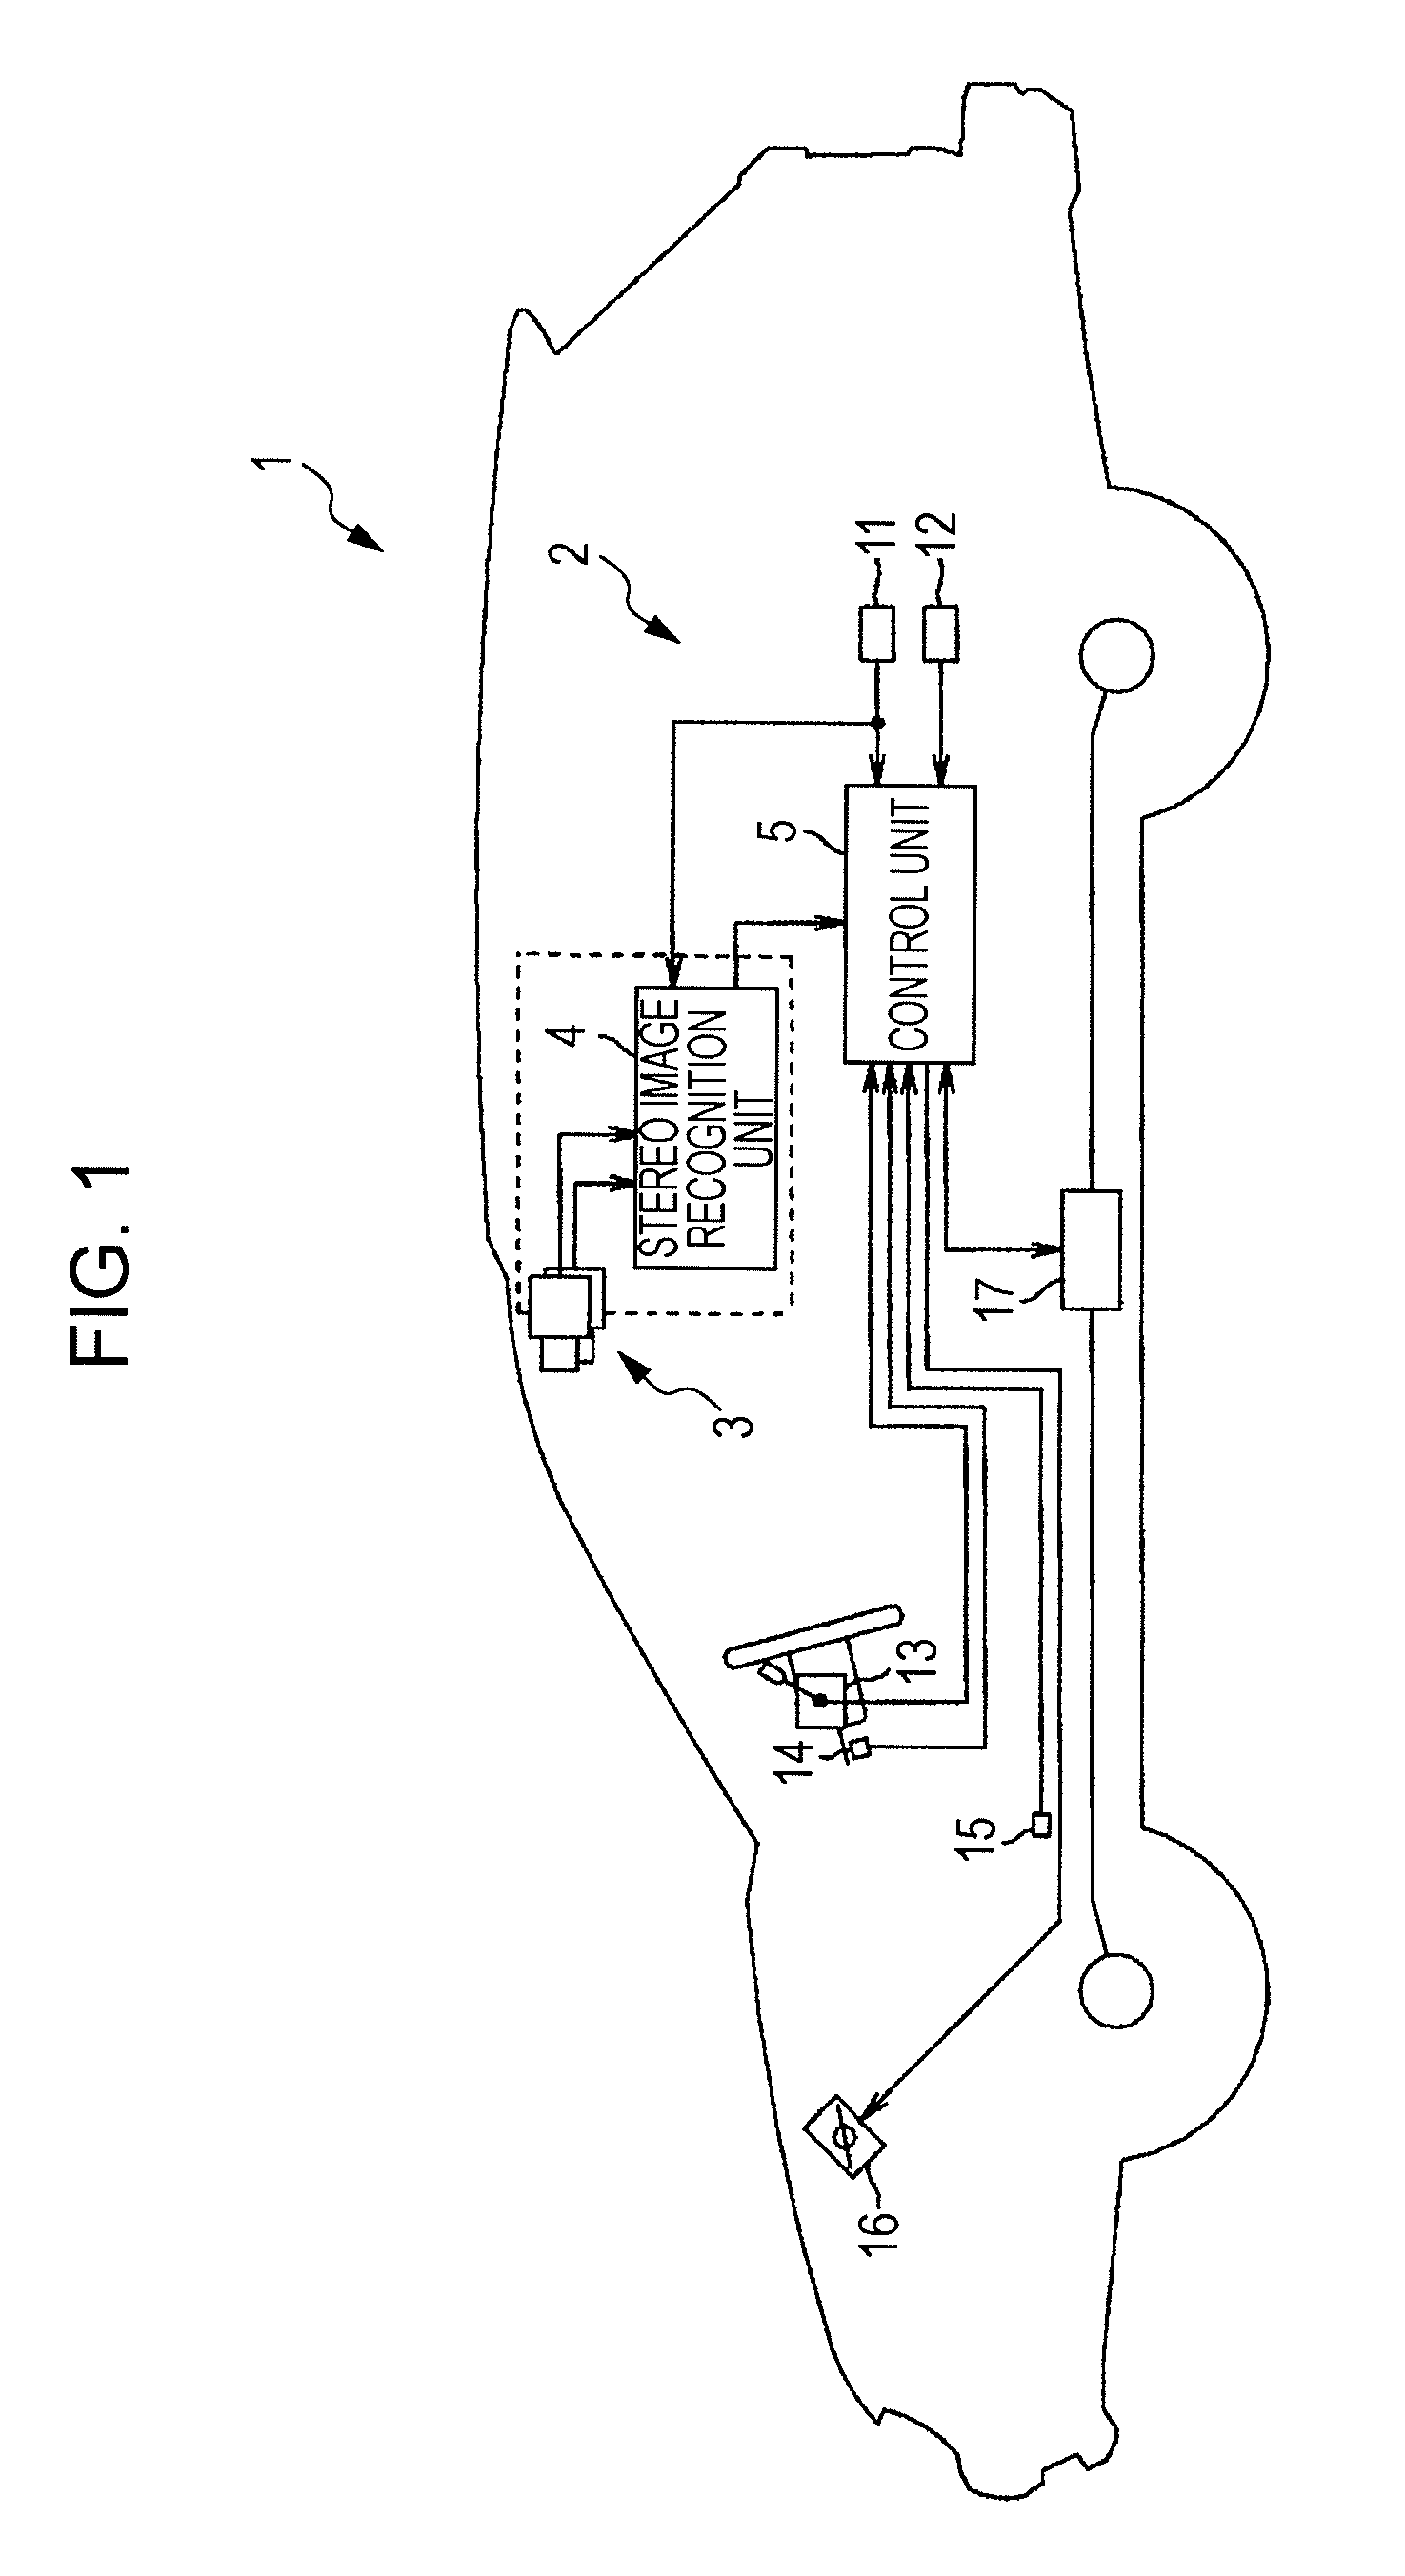 White road line recognition device for vehicle